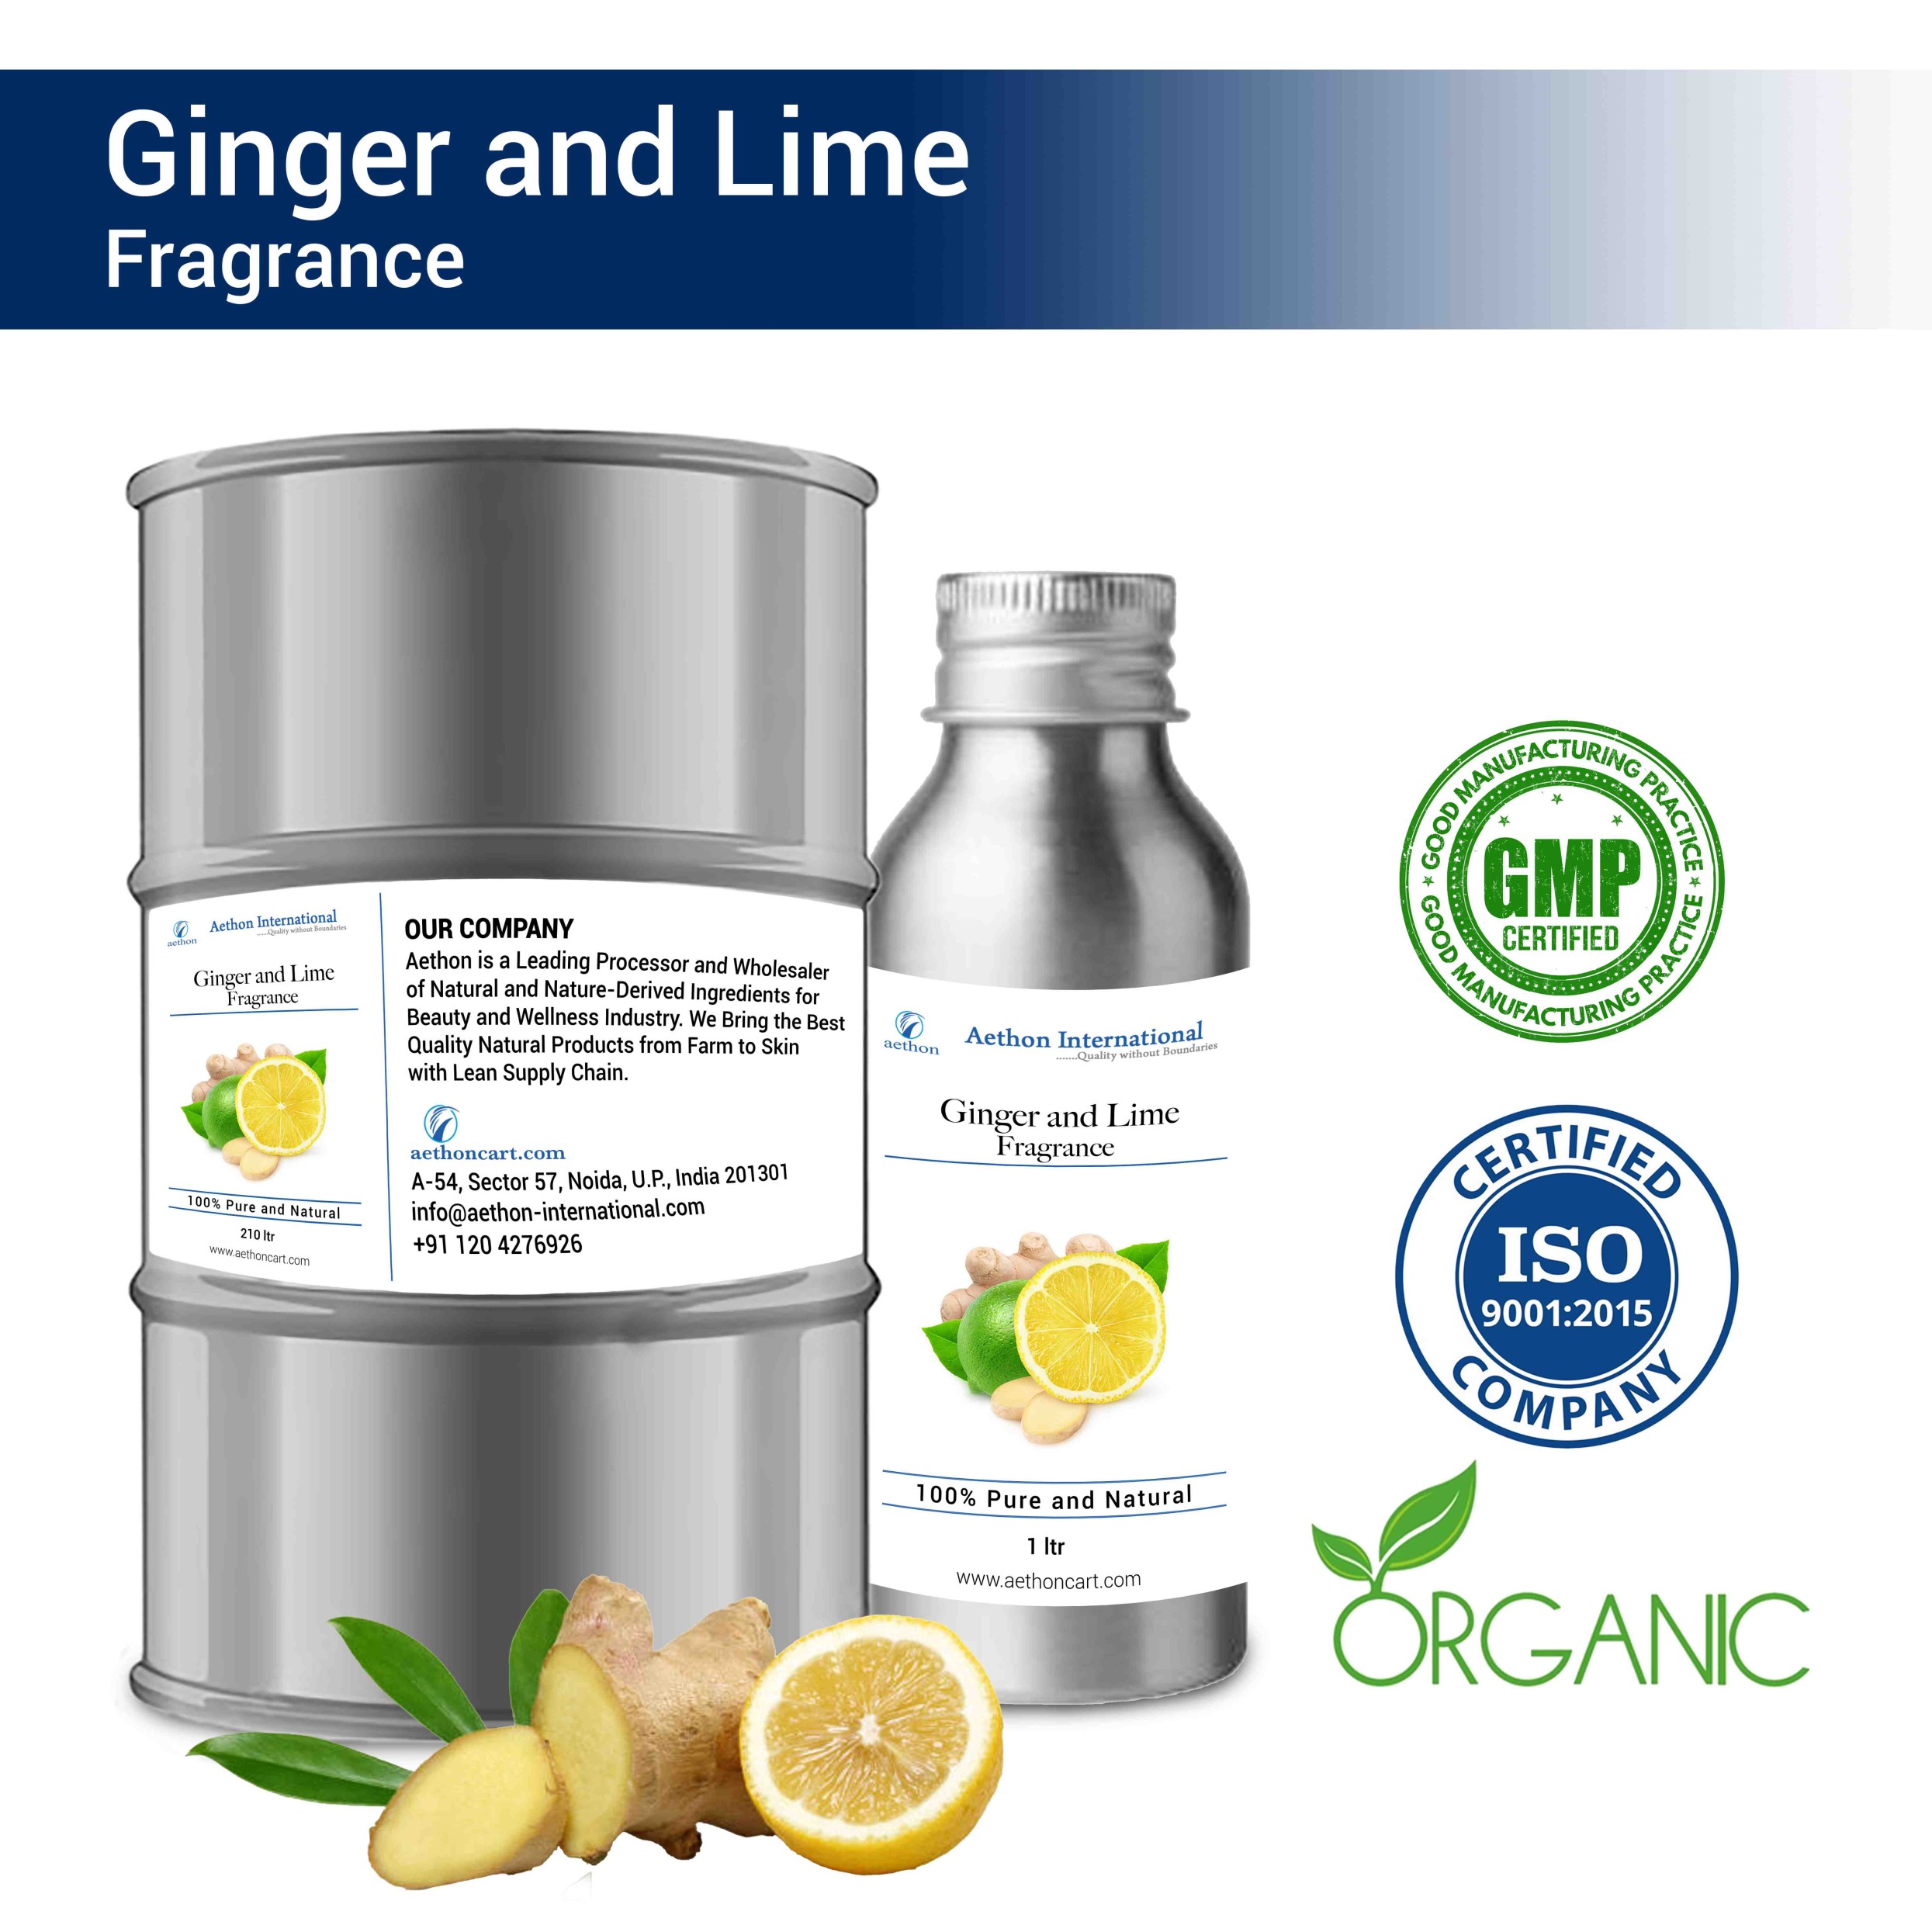 Ginger and Lime (WS)